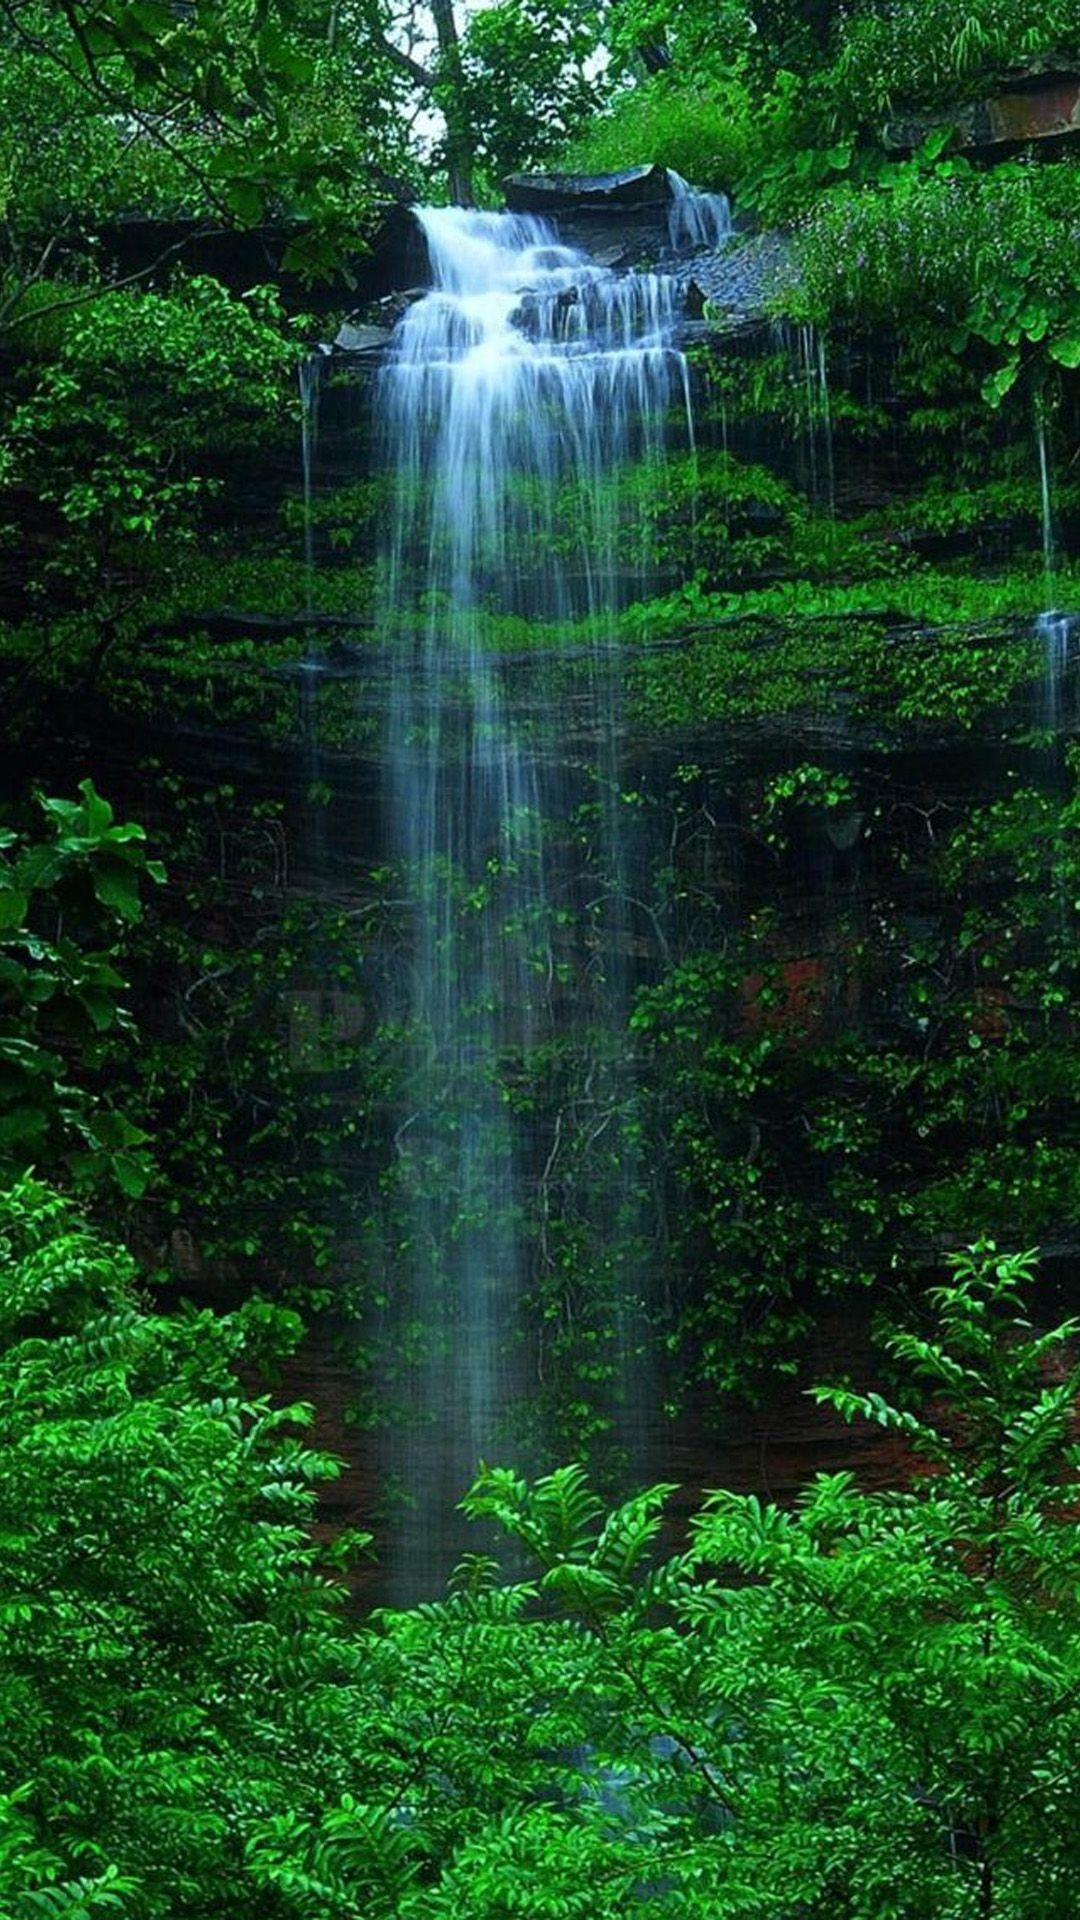 Nature Forest Waterfall IPhone 6 Wallpaper Download. IPhone Wallpaper, IPad Wallpaper One Stop Dow. Waterfall Wallpaper, Waterfall Background, Forest Waterfall